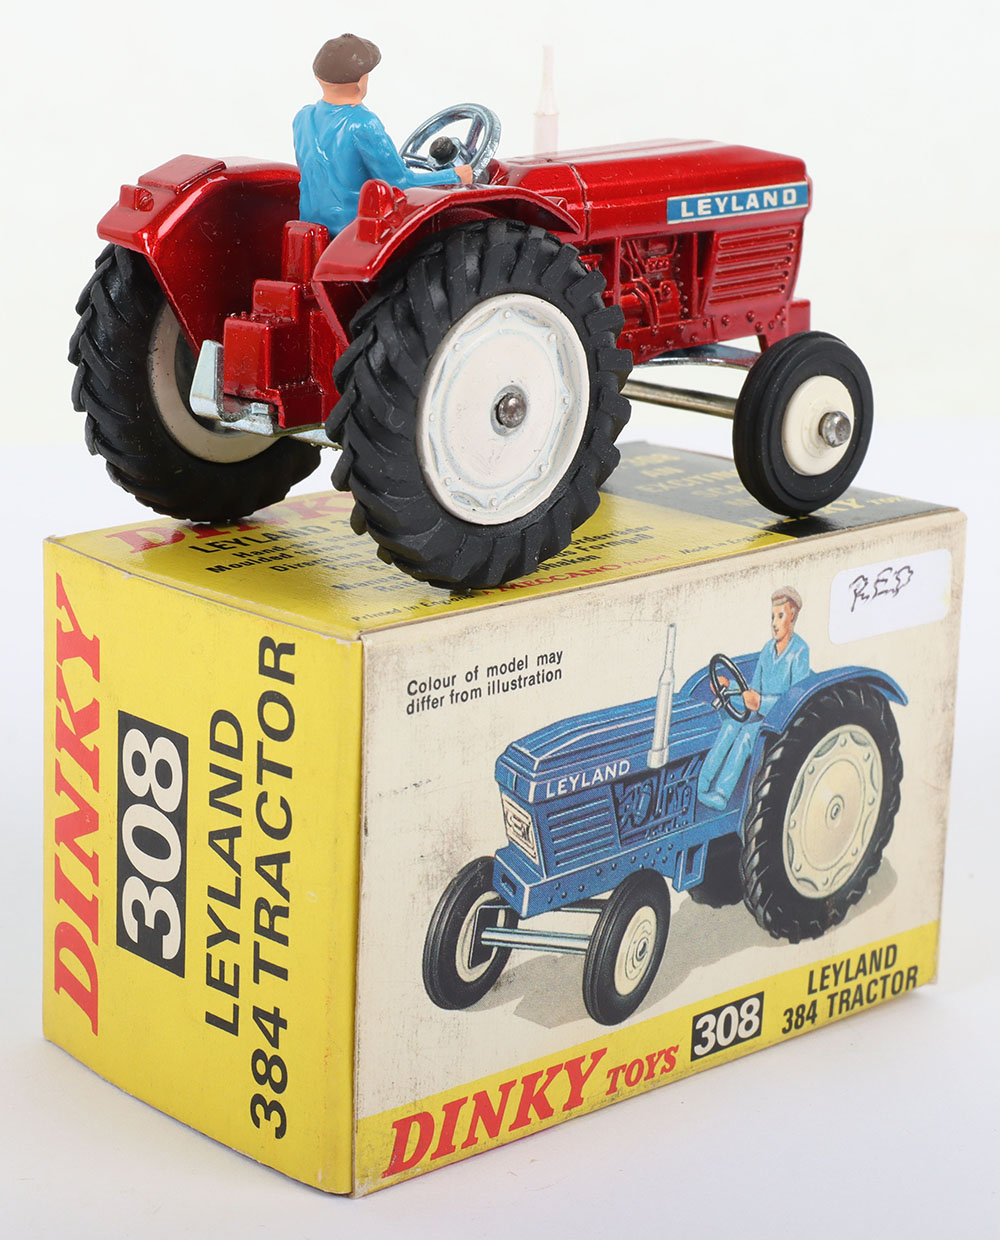 Dinky Toys 308 Leyland 384 Tractor, metallic red body - Image 3 of 3